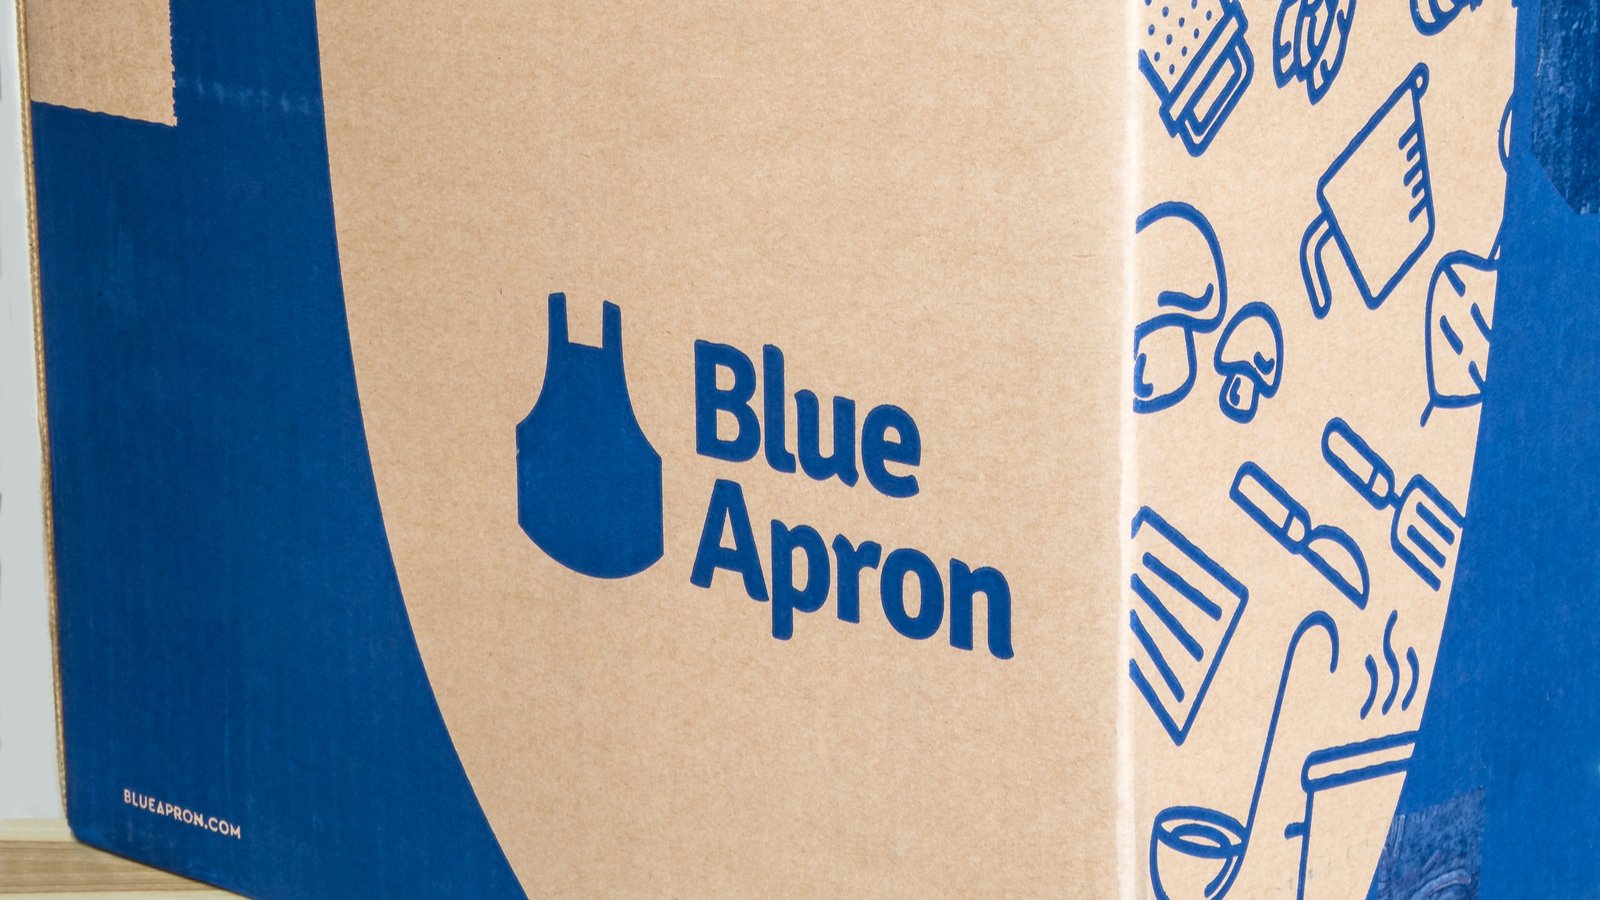 Image of the Blue Apron (APRN) logo on one of the company's branded cardboard boxes used for its deliveries. It features several images of vegetables and kitchen tools on the side, next to the logo.